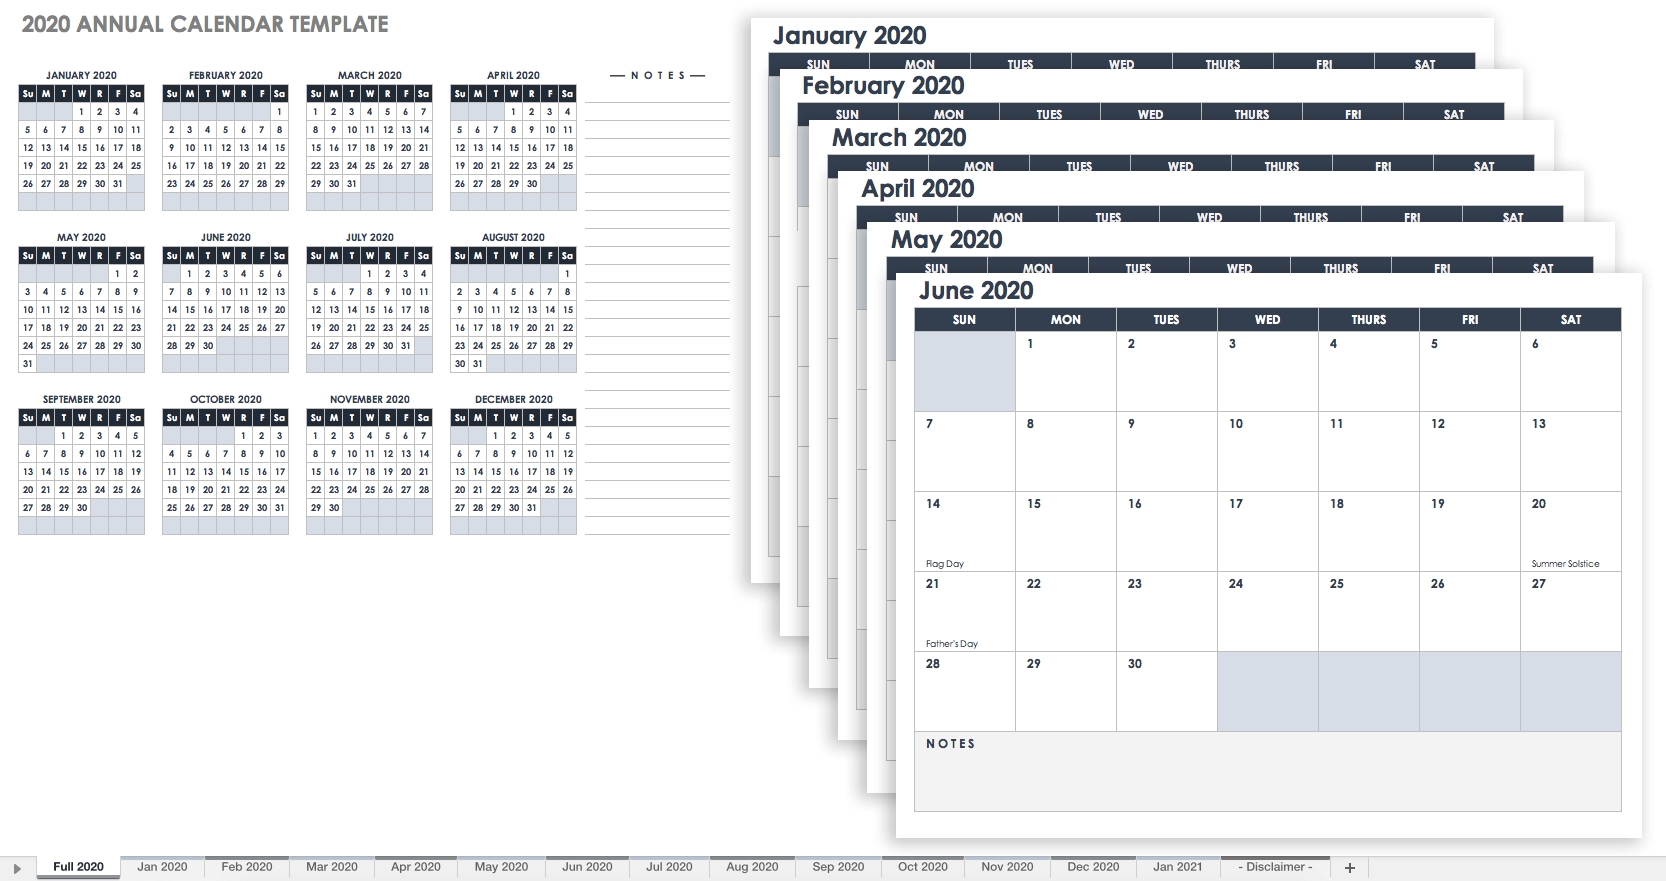 Free Blank Calendar Templates - Smartsheet Exceptional Blank Calendar You Can Type In